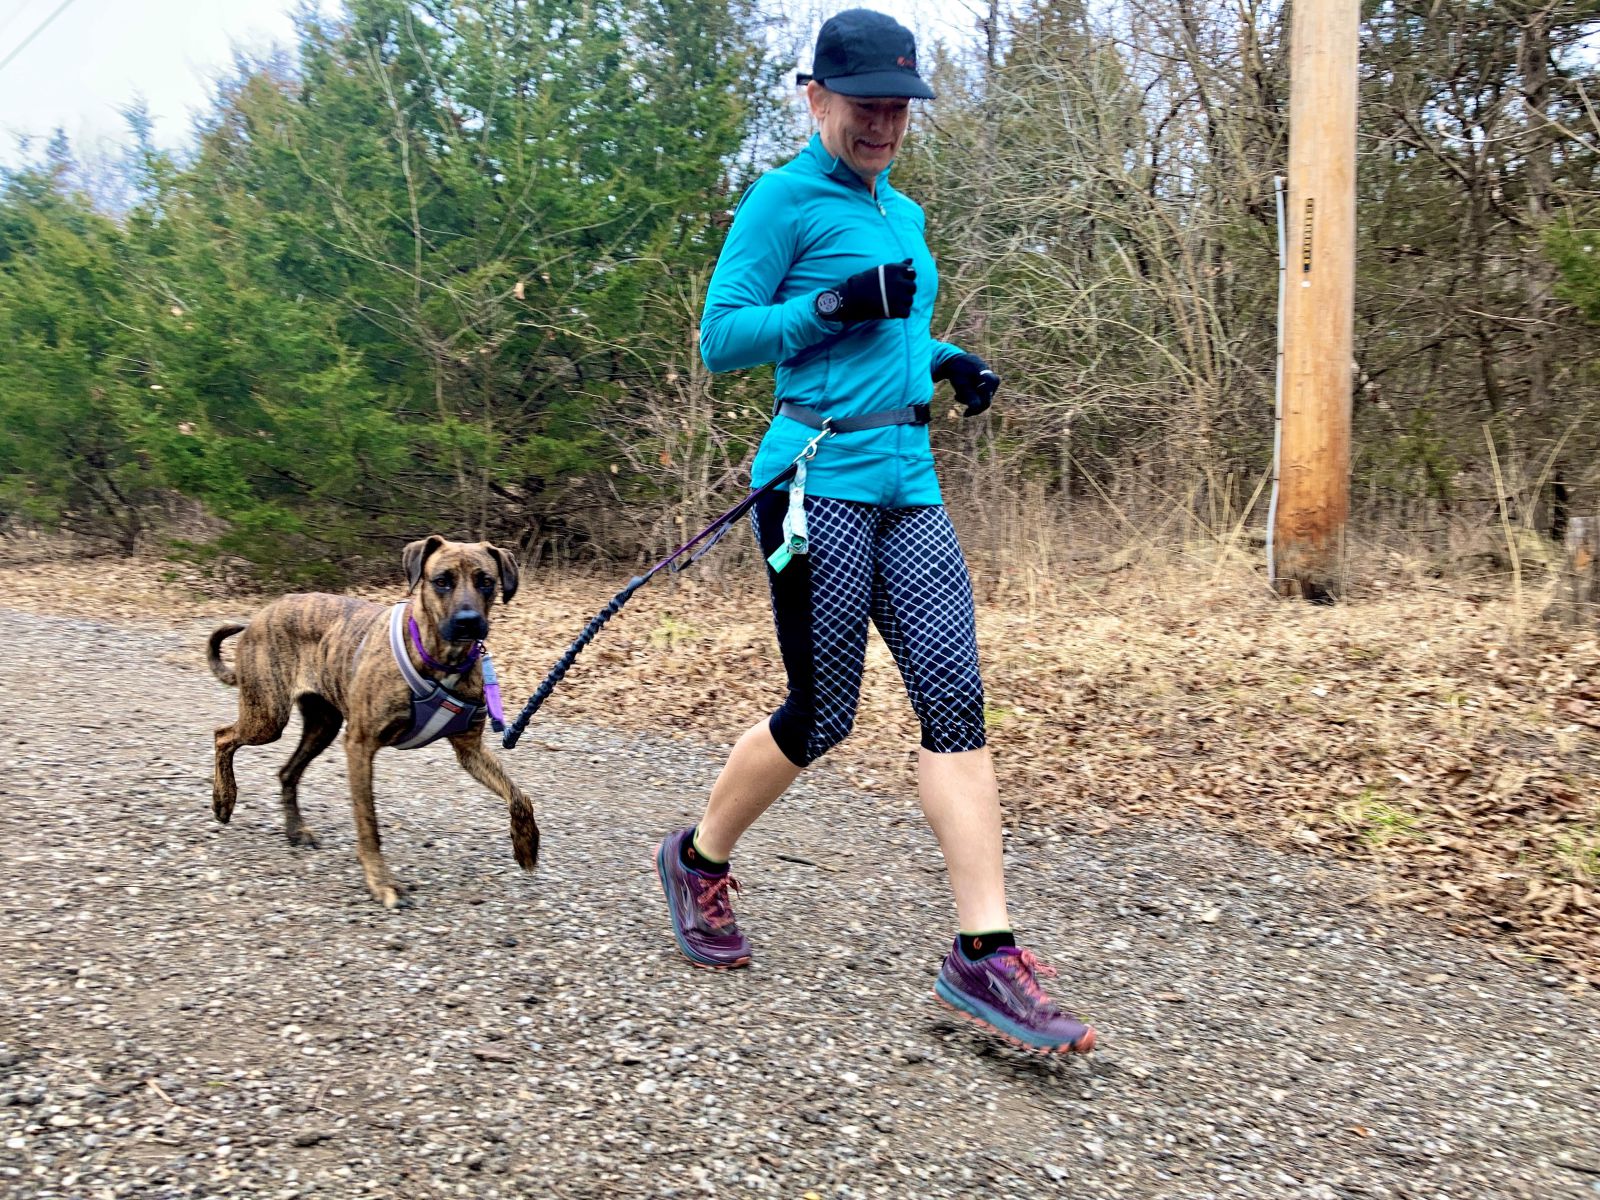 Shari Hicks adopted her dog Mags from an animal shelter in Ottawa. Mags has become a great running companion.